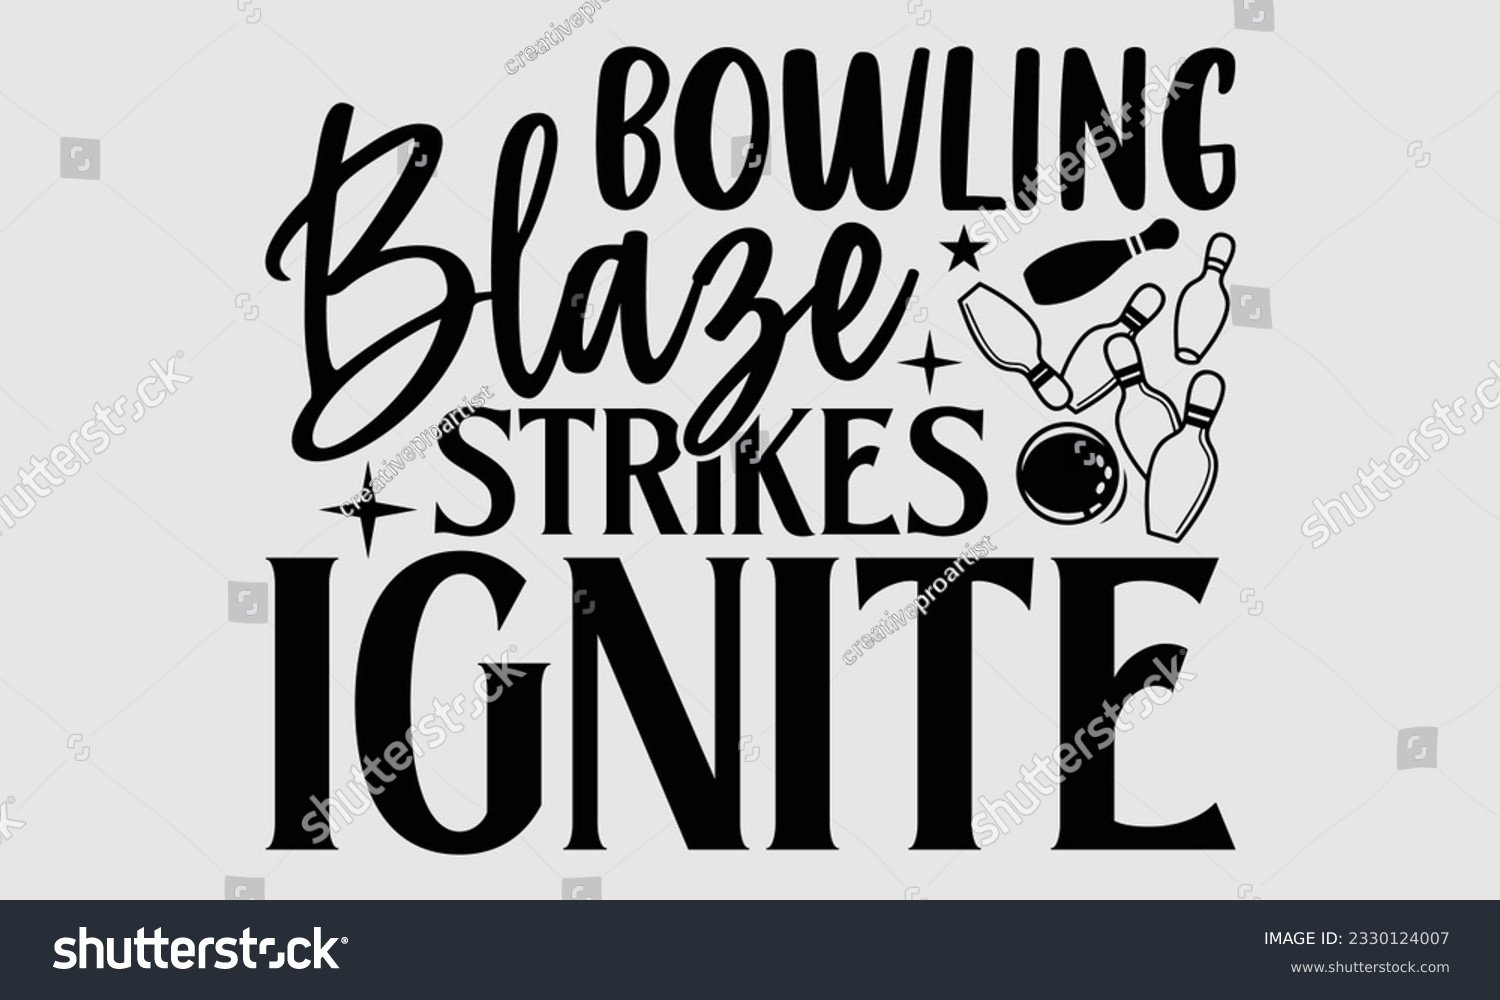 SVG of Bowling Blaze Strikes Ignite- Bowling t-shirt design, Illustration for prints on SVG and bags, posters, cards, greeting card template with typography text EPS svg